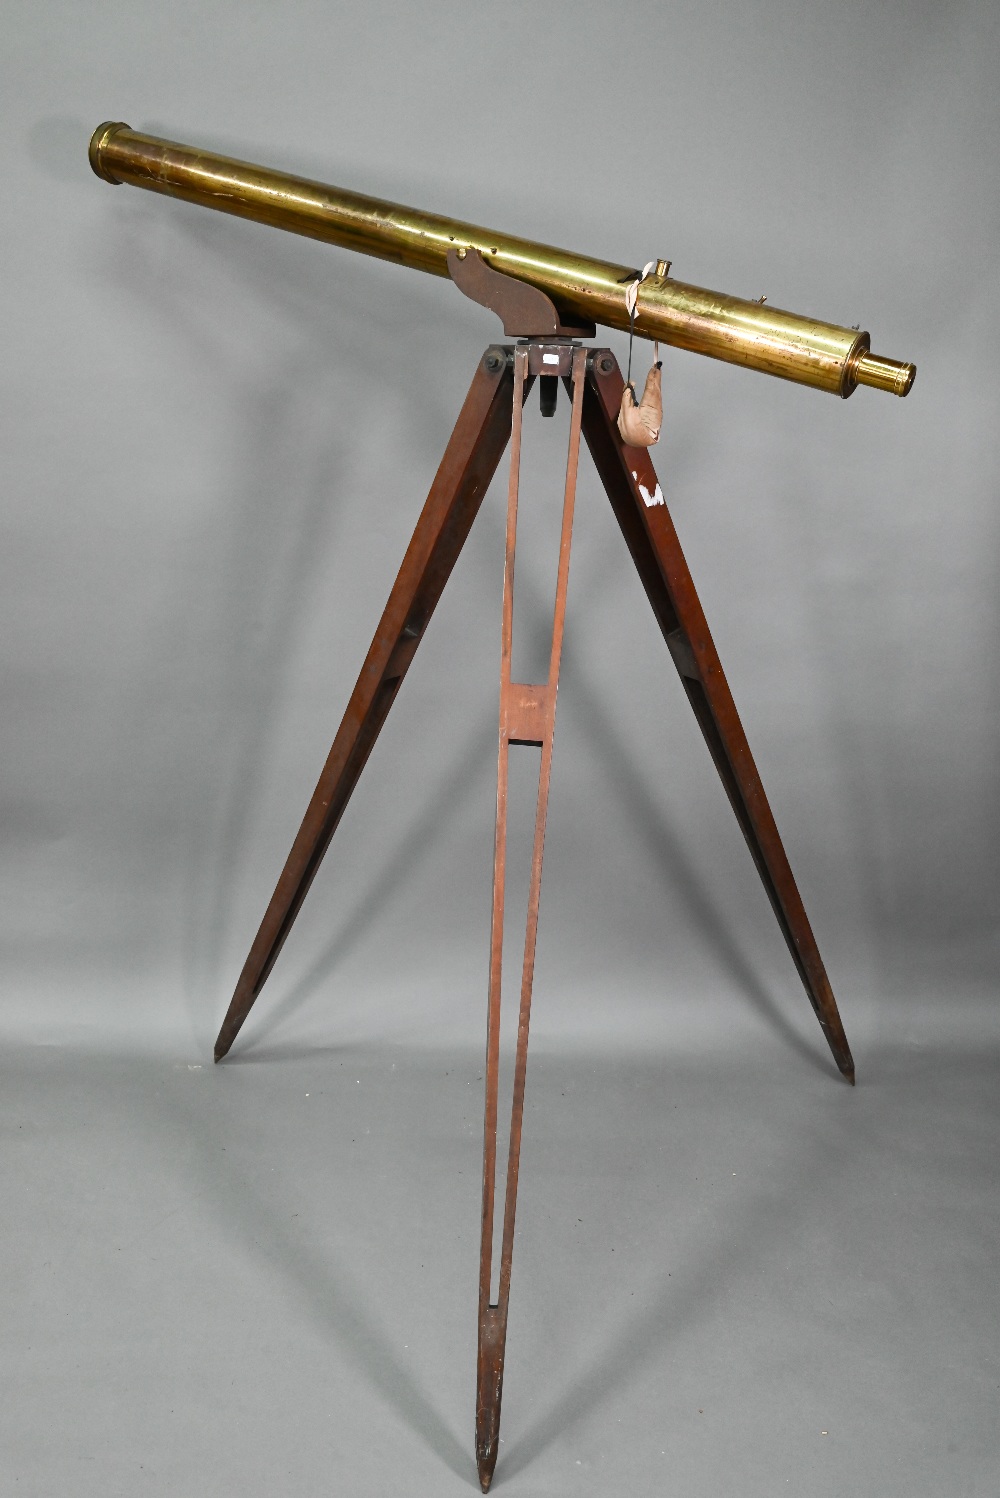 Dolland, London, a late 19th century brass tube telescope, raised on a folding wooden tripod stand - - Image 3 of 14